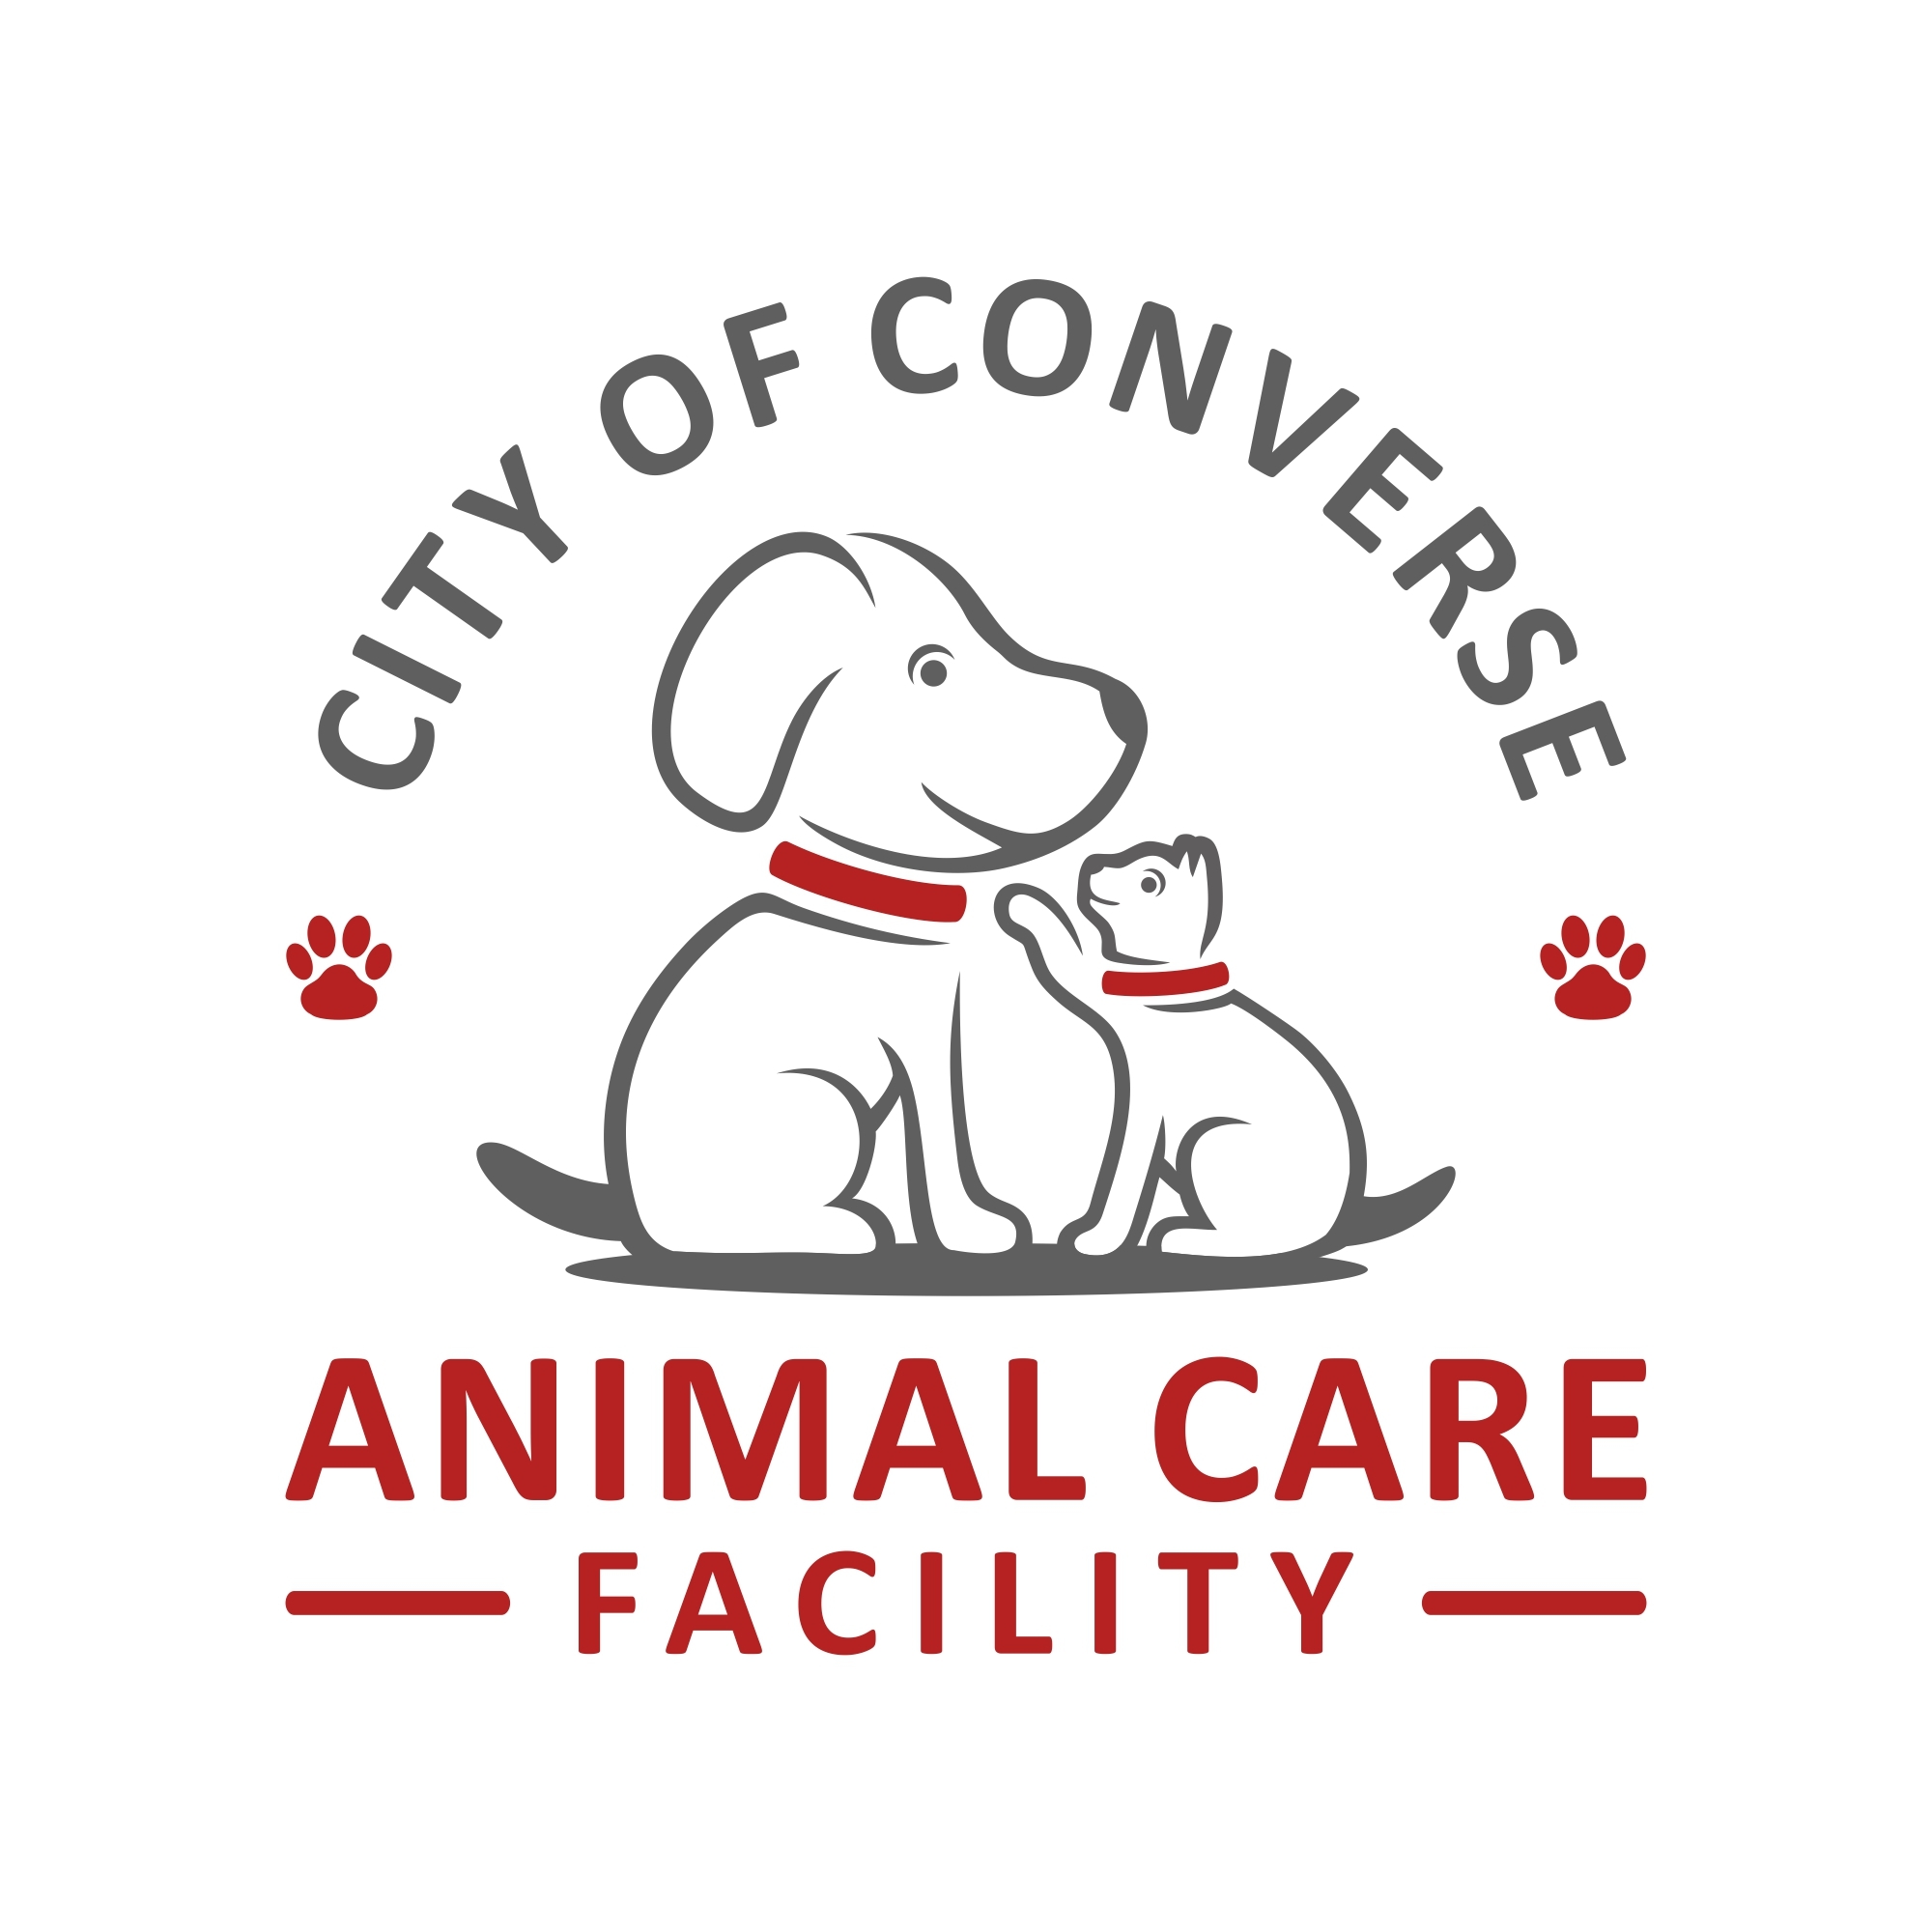 Pets for Adoption at City of Converse Animal Care, in Converse, TX |  Petfinder